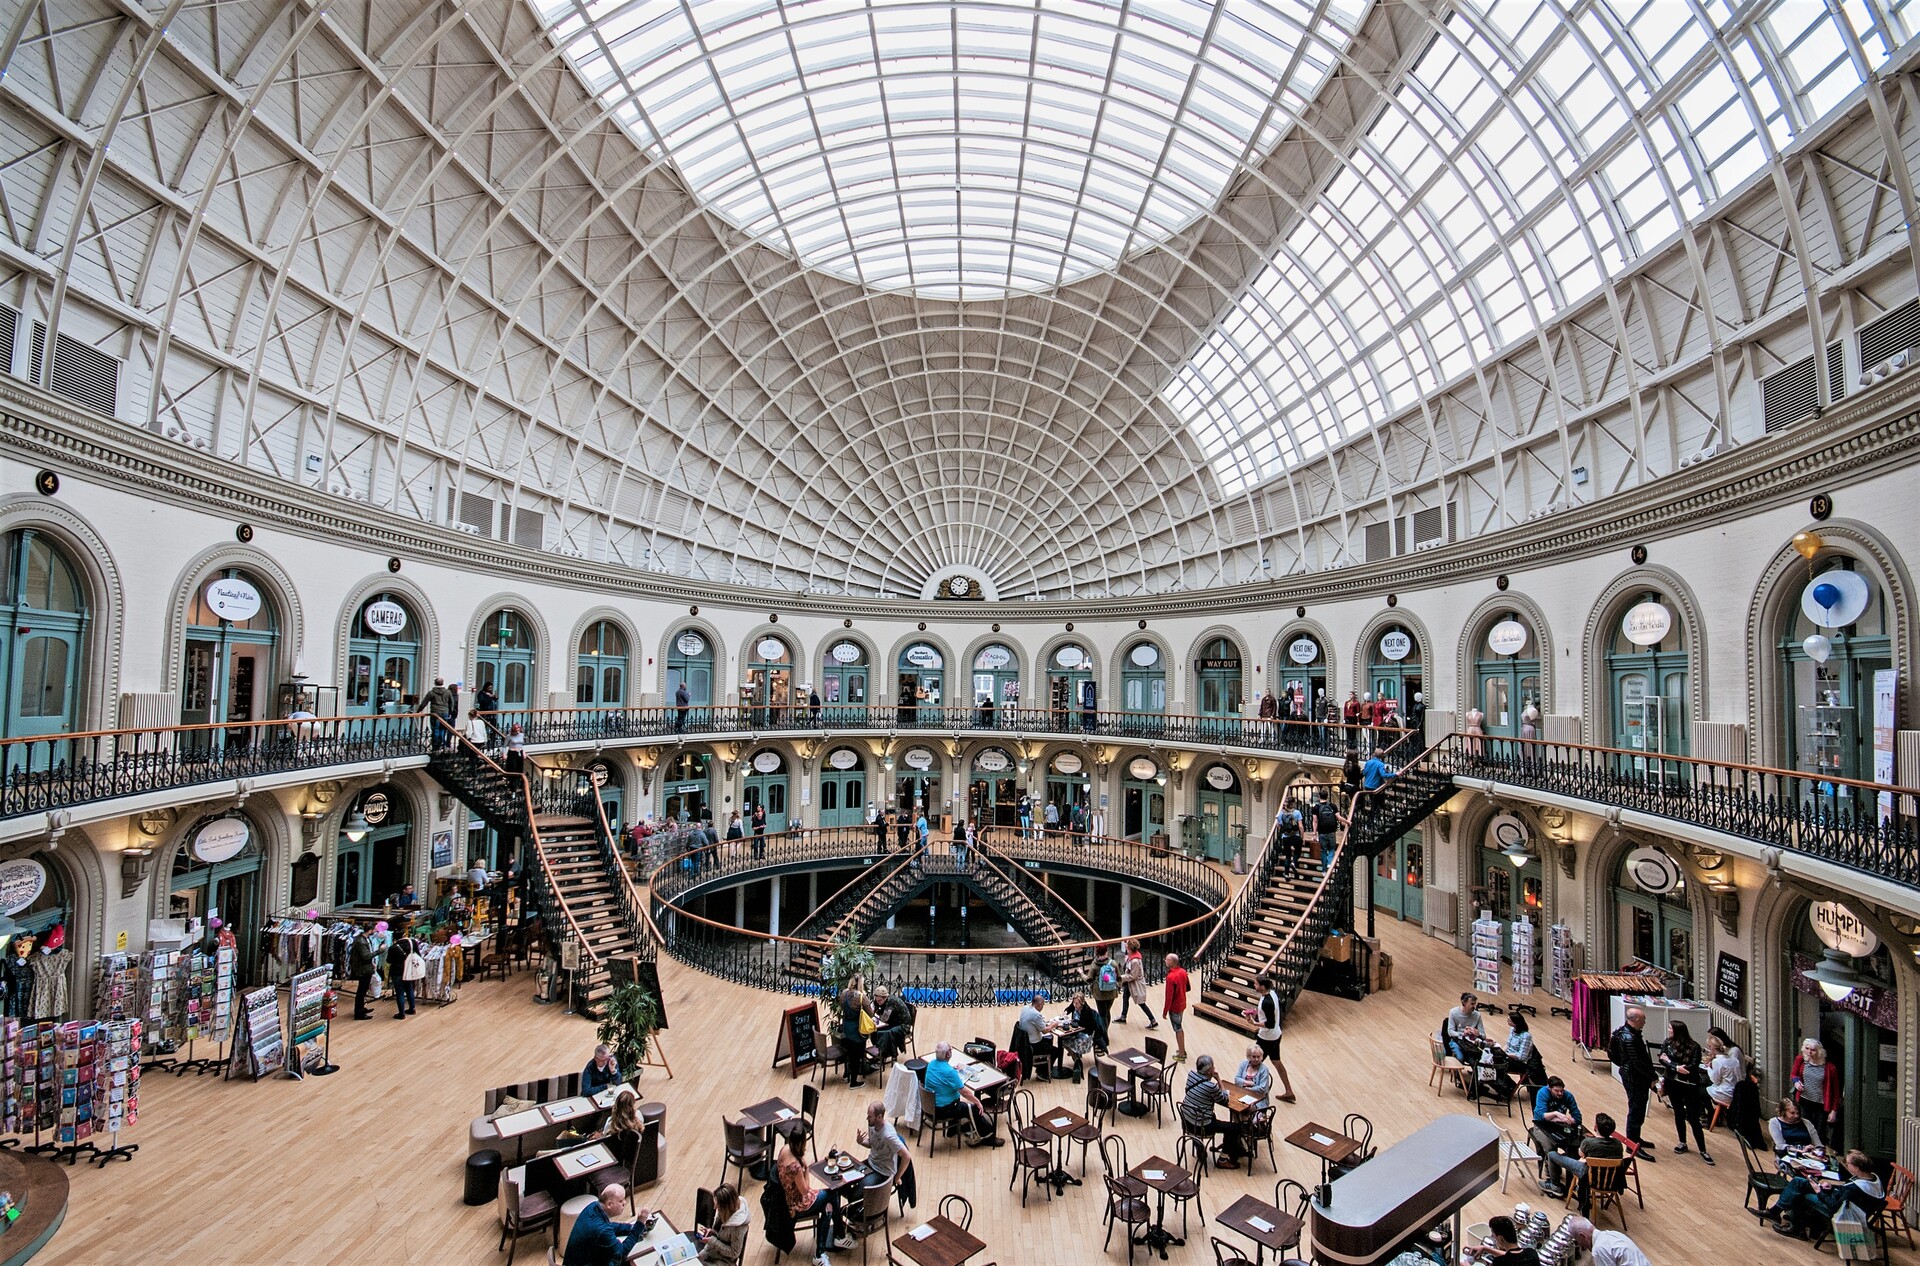 Top 15 Leeds Attractions - The best things to do and see in Leeds